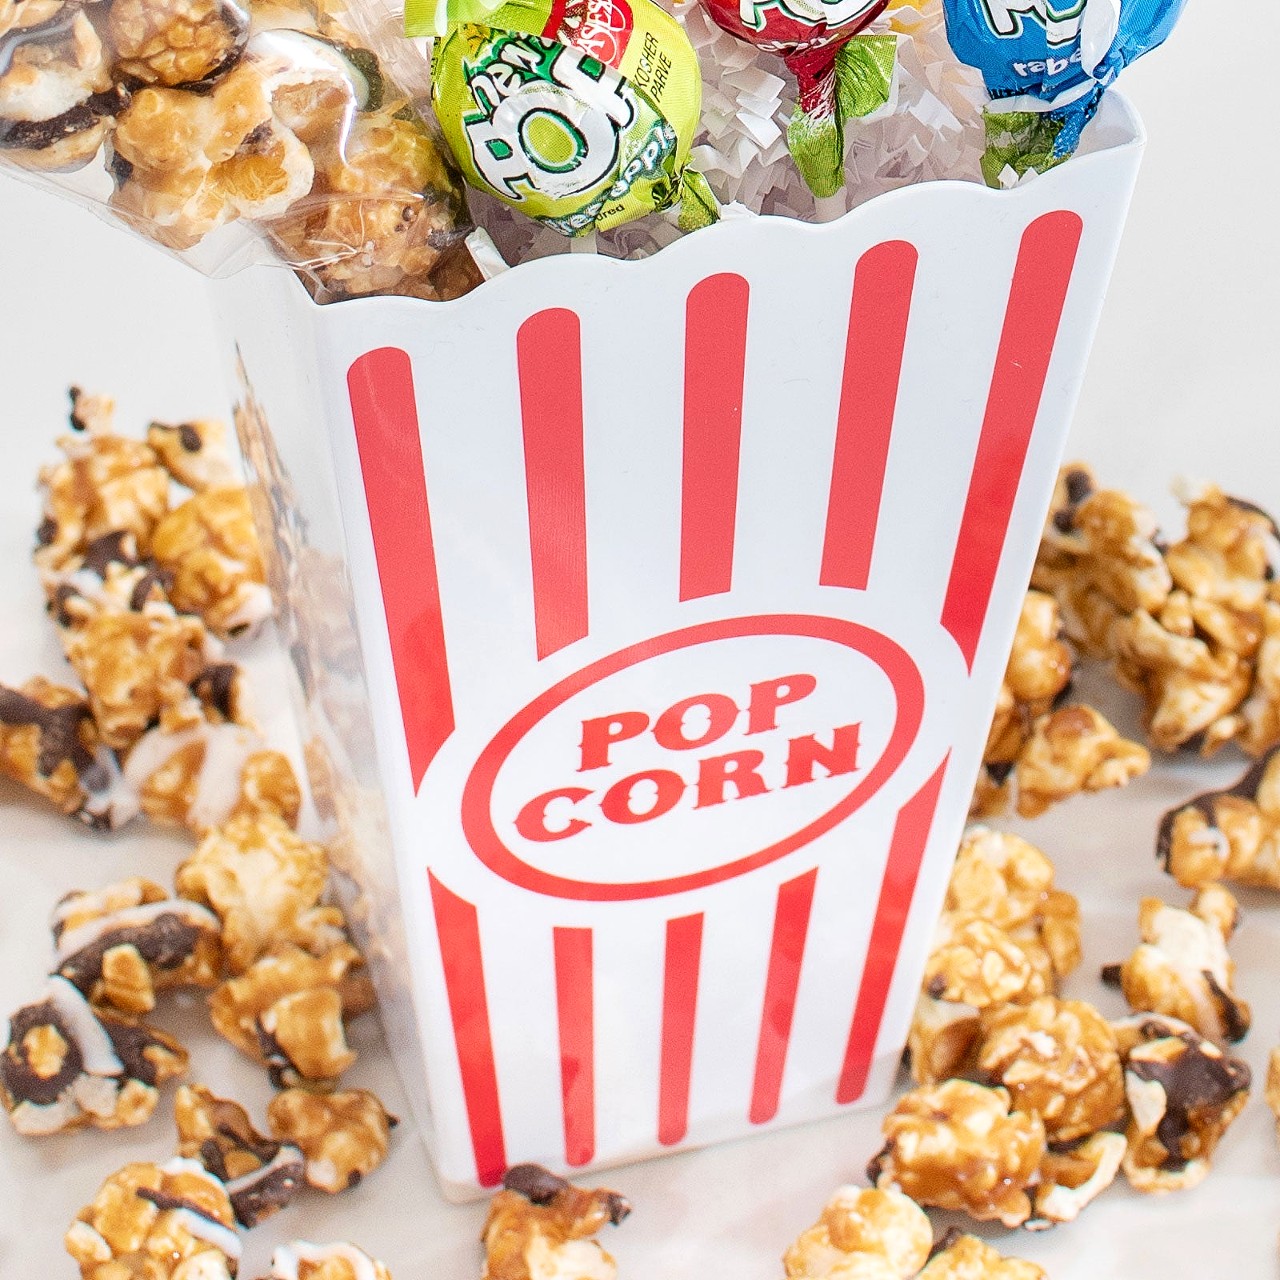 Valentine's Day Gourmet Popcorn And Candy Gift Box